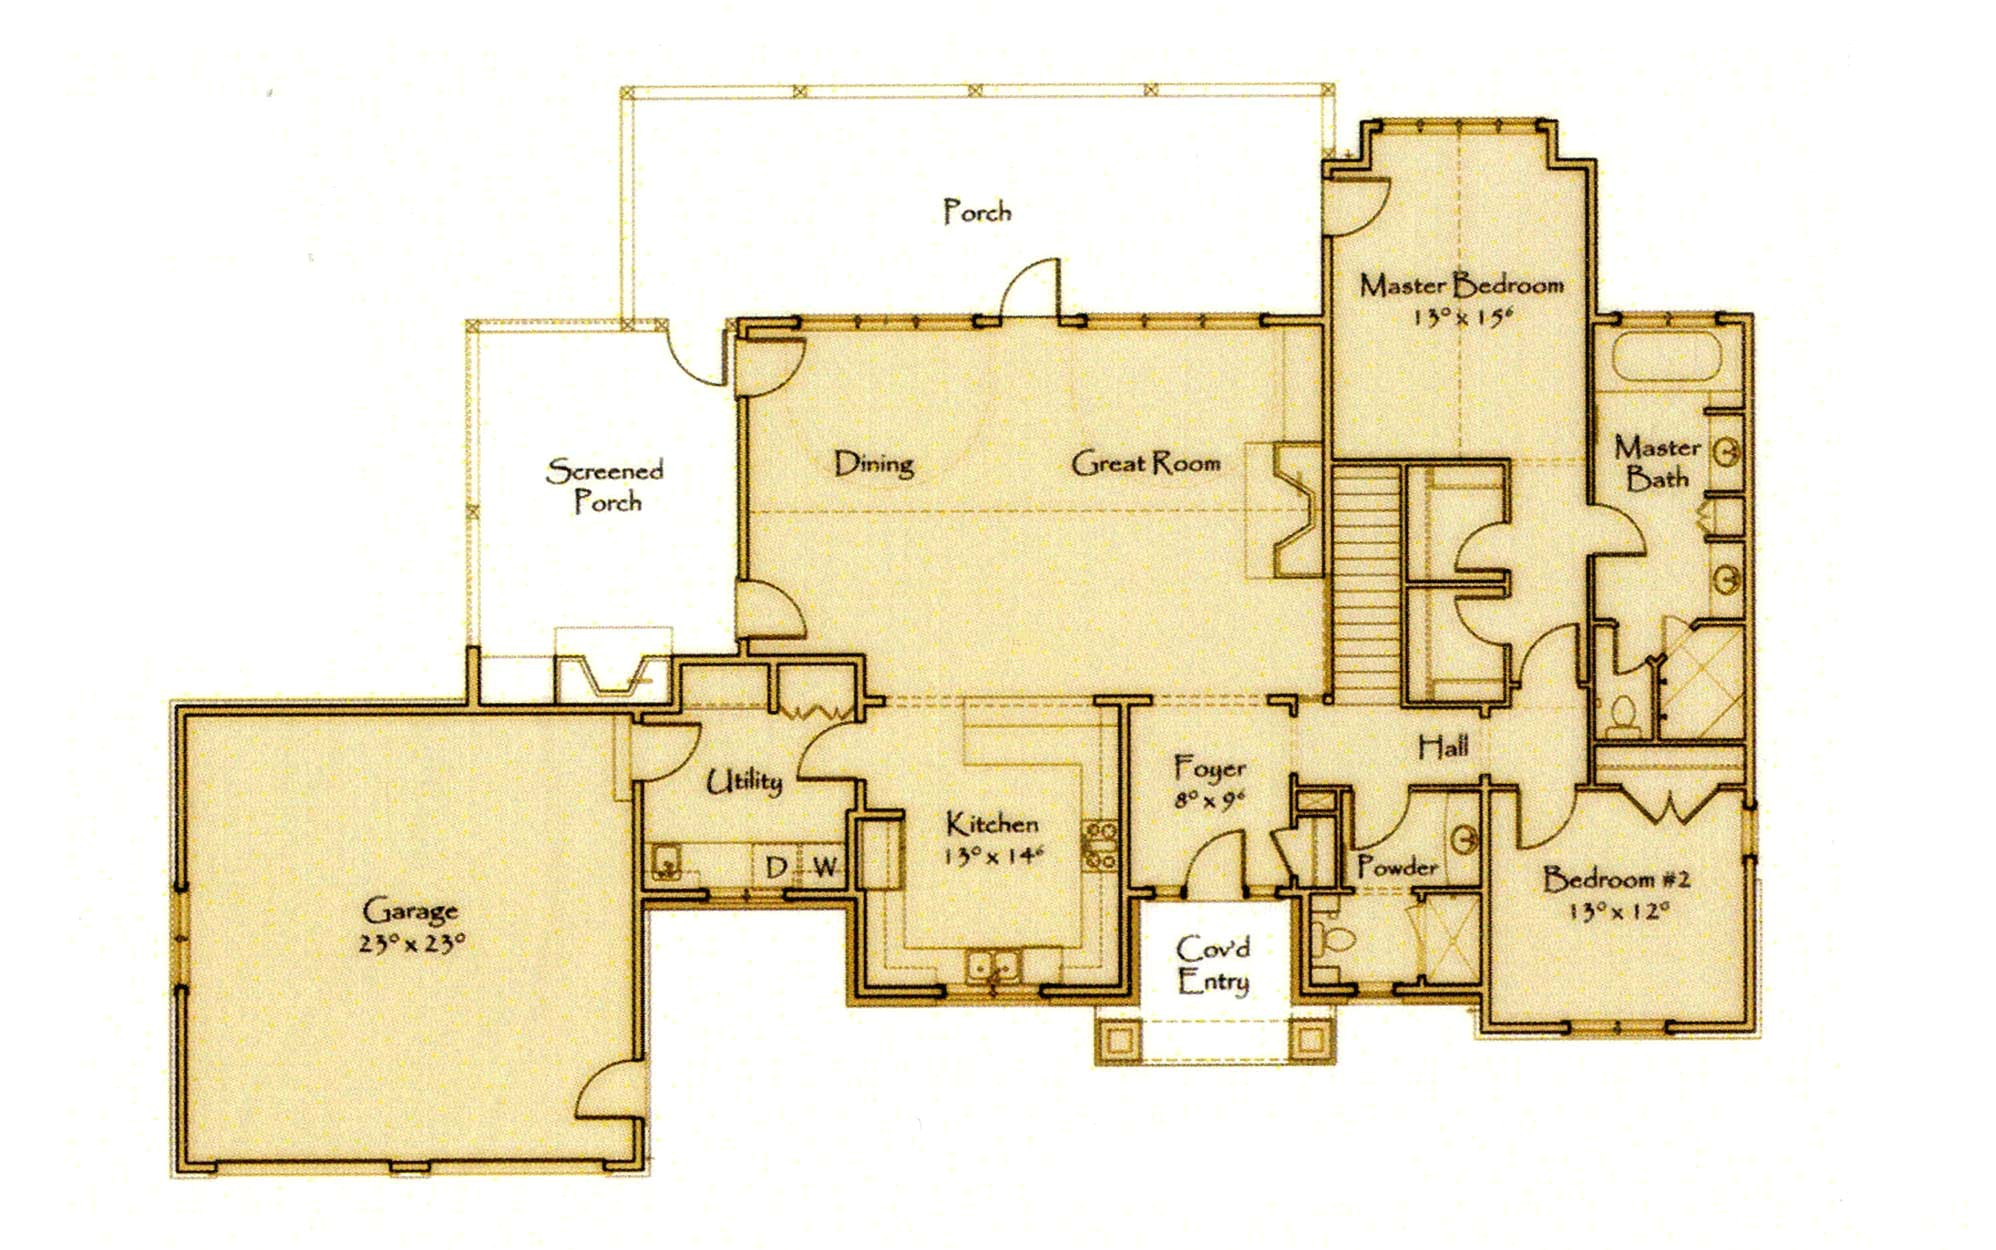 Signature Home Plans Open Floor Plans Search Thousands Of House Yellow Can Arafen